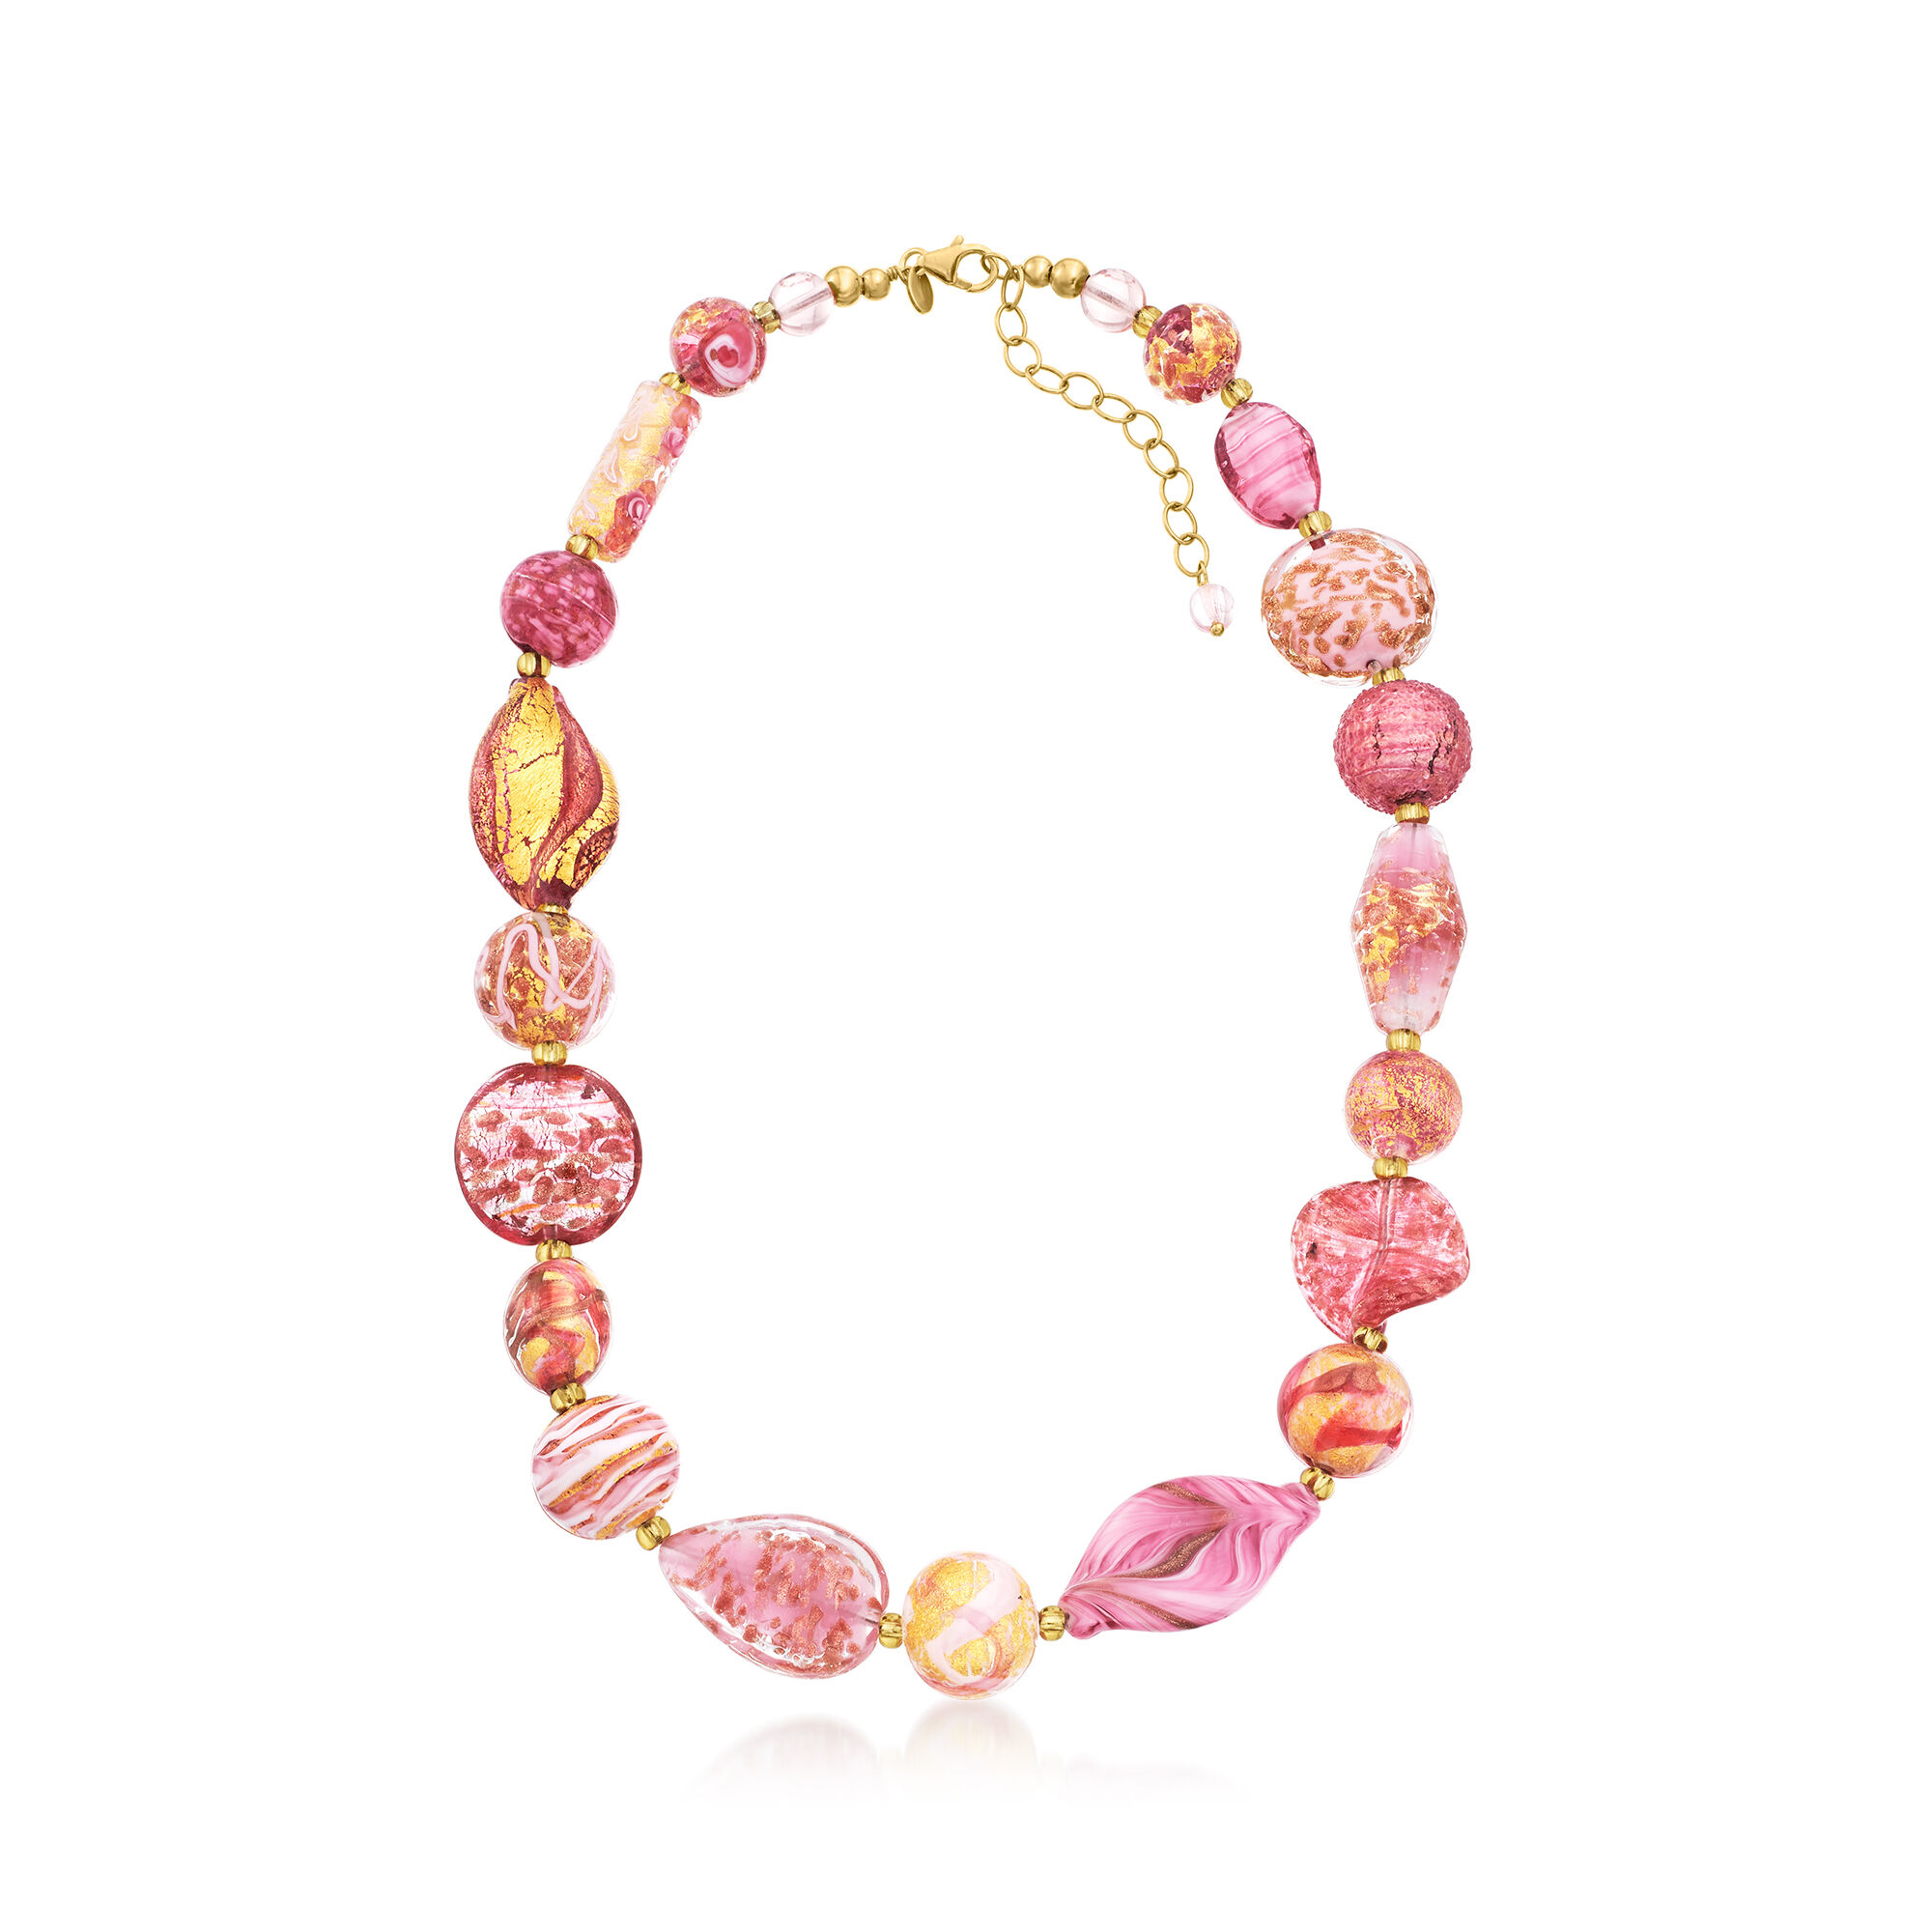 Italian Pink and Gold Murano Glass Bead Necklace in 18kt Gold Over